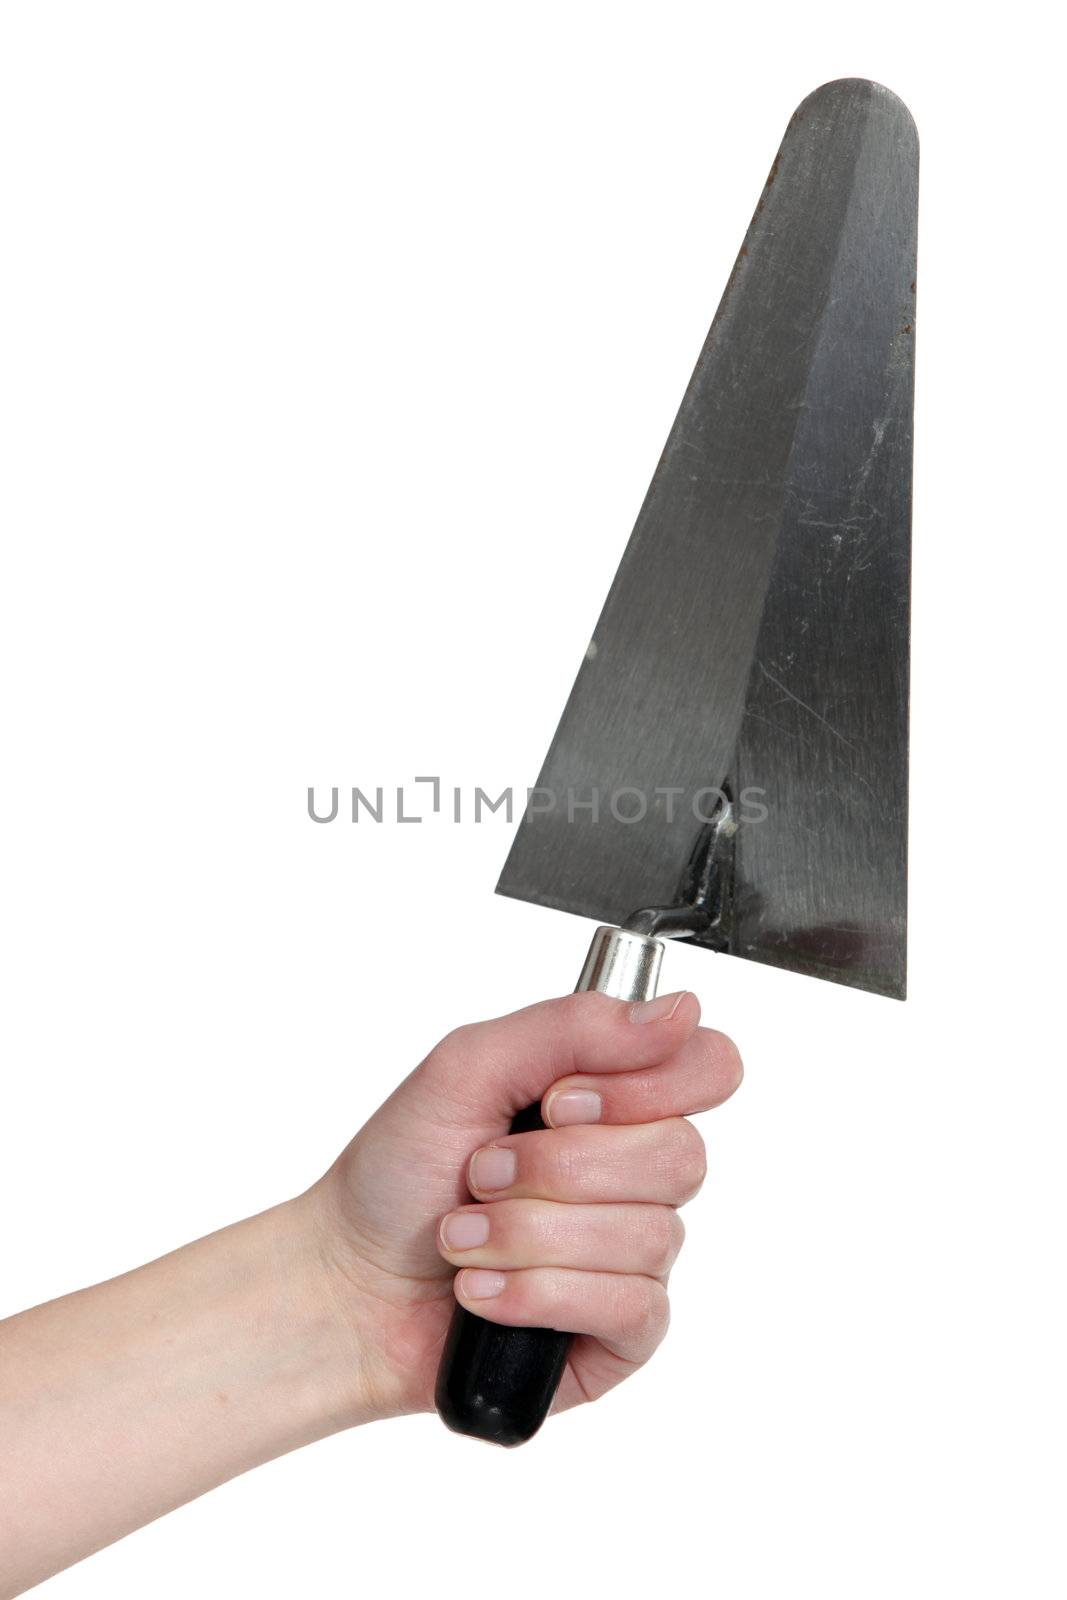 A hand holding a trowel.